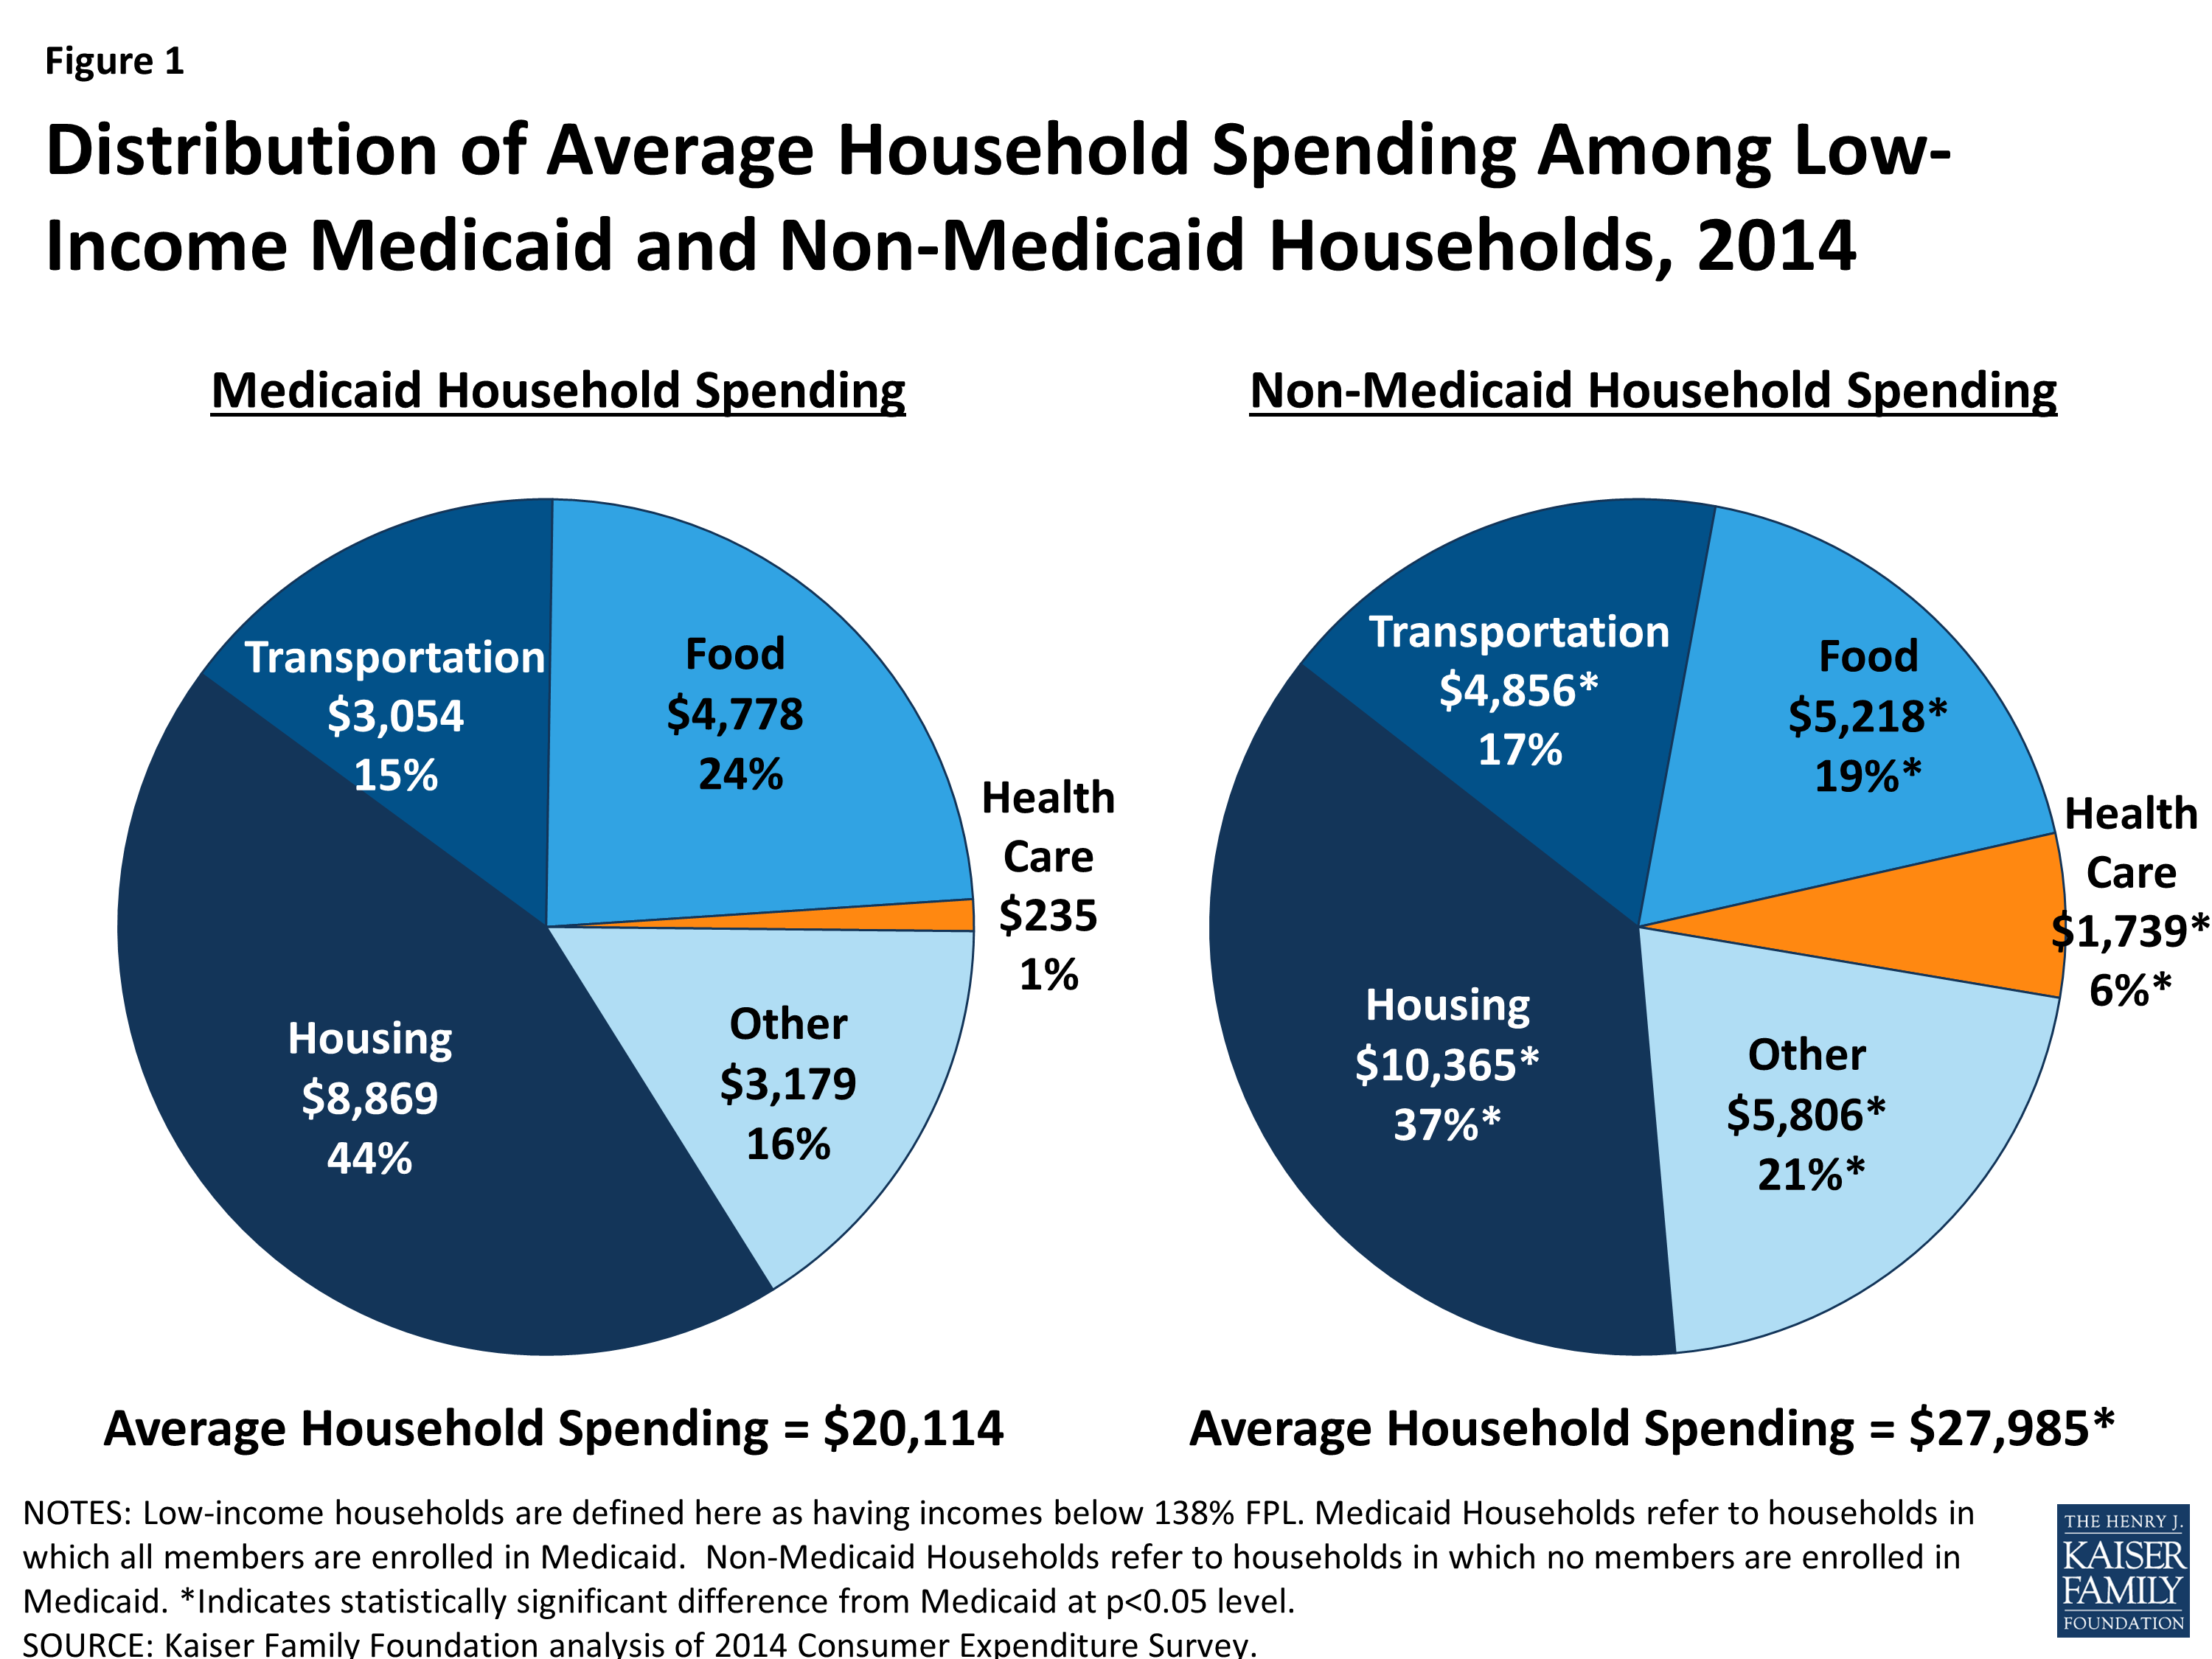 health-care-spending-among-low-income-households-with-and-without